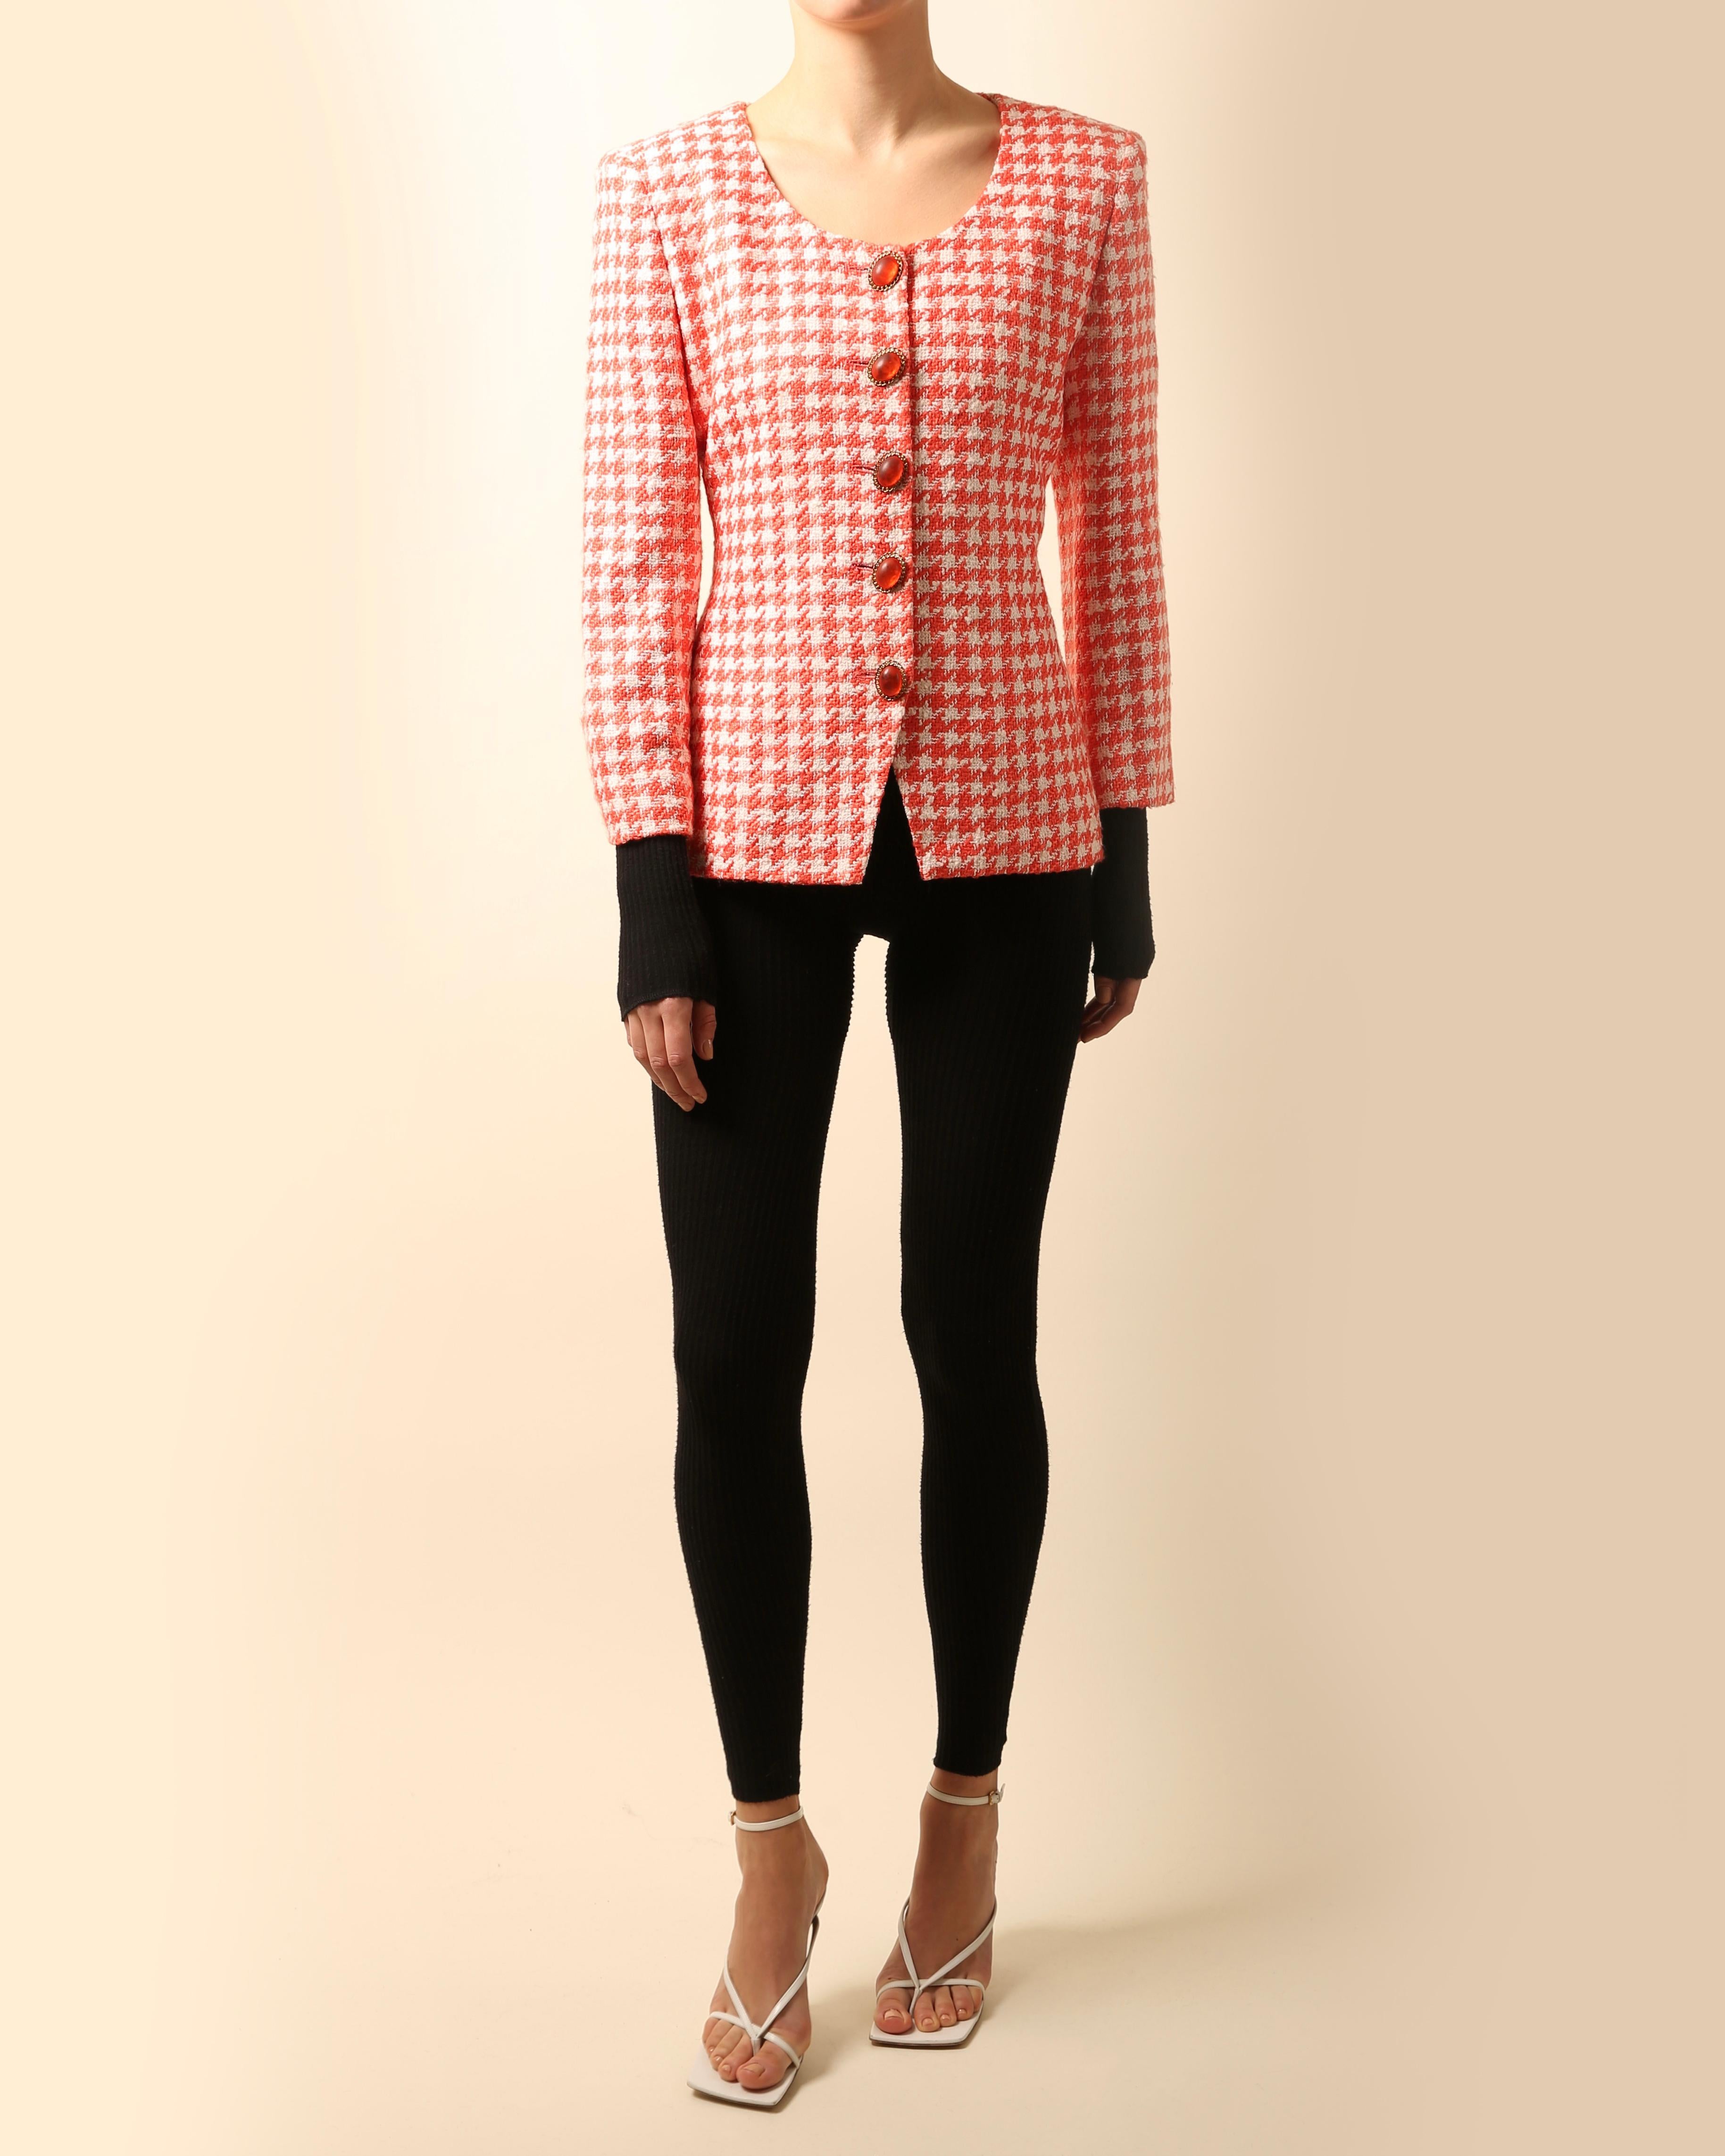 LOVE LALI VINTAGE

Christian Dior Vintage blazer style jacket in red and white checkered tweed
Oversized jewel buttons
Padded shoulders to create a beautifully structured fit

Composition: 
Unknown - composition labels have been